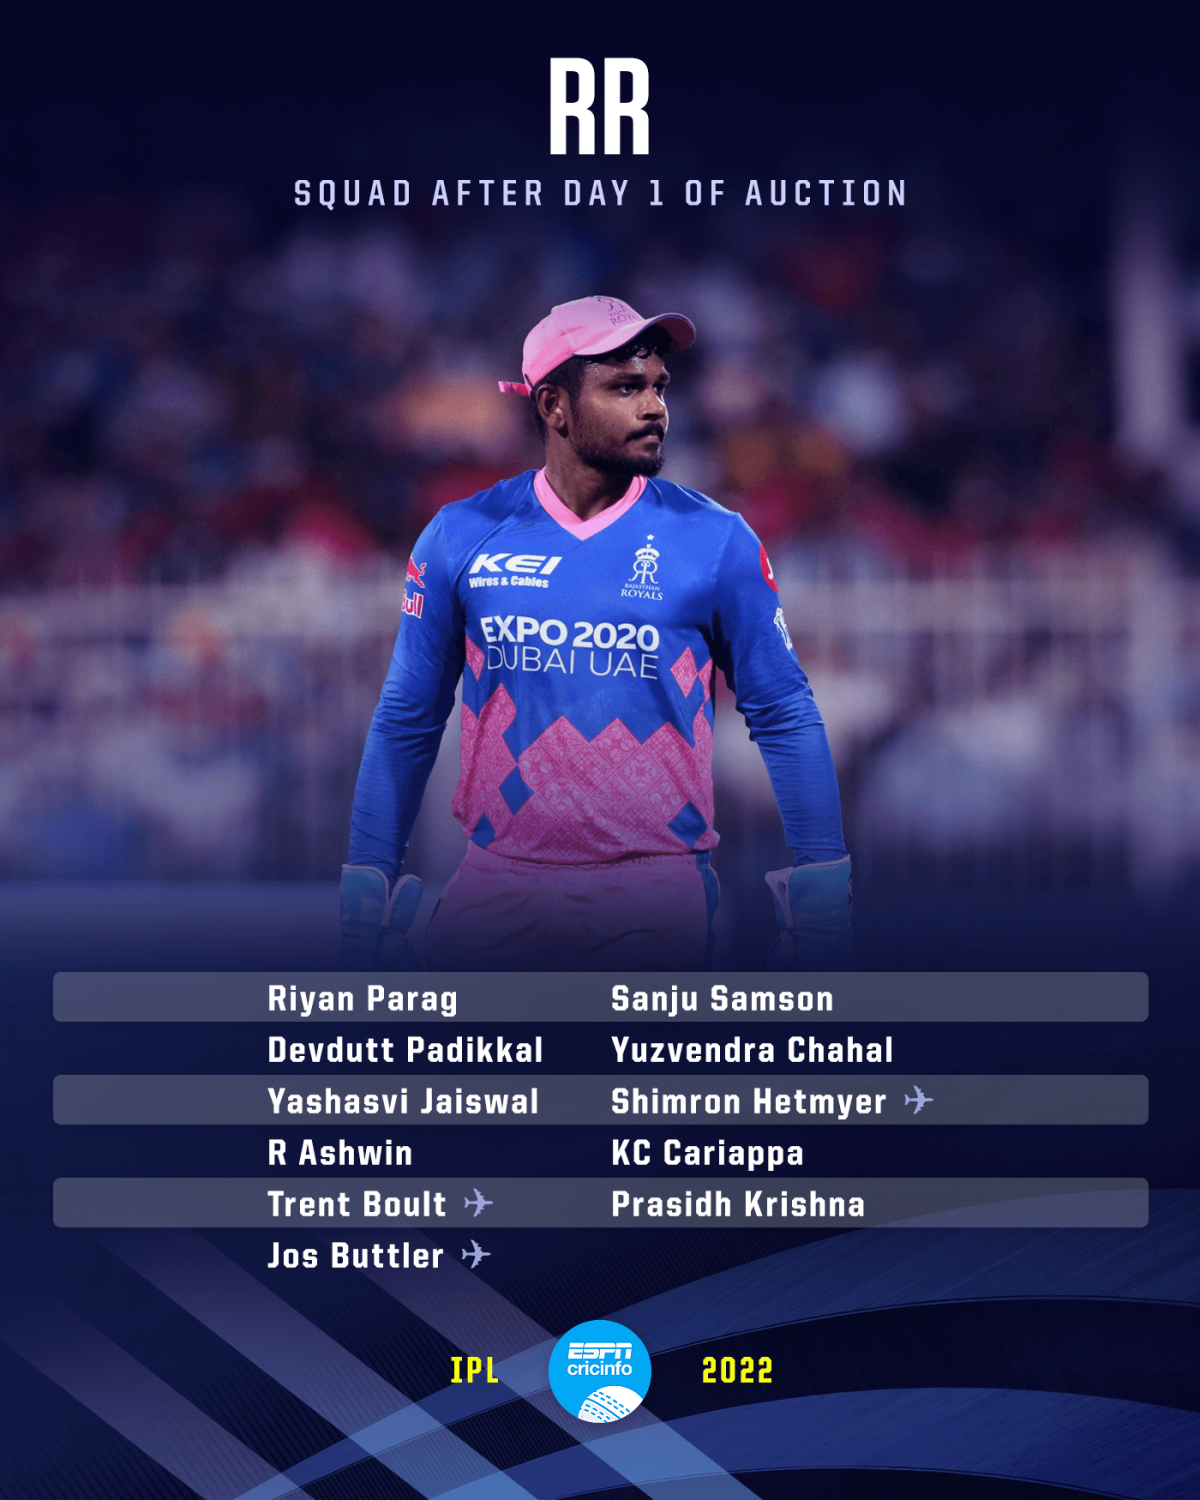 RR squad after first day of IPL 2022 auction ESPNcricinfo